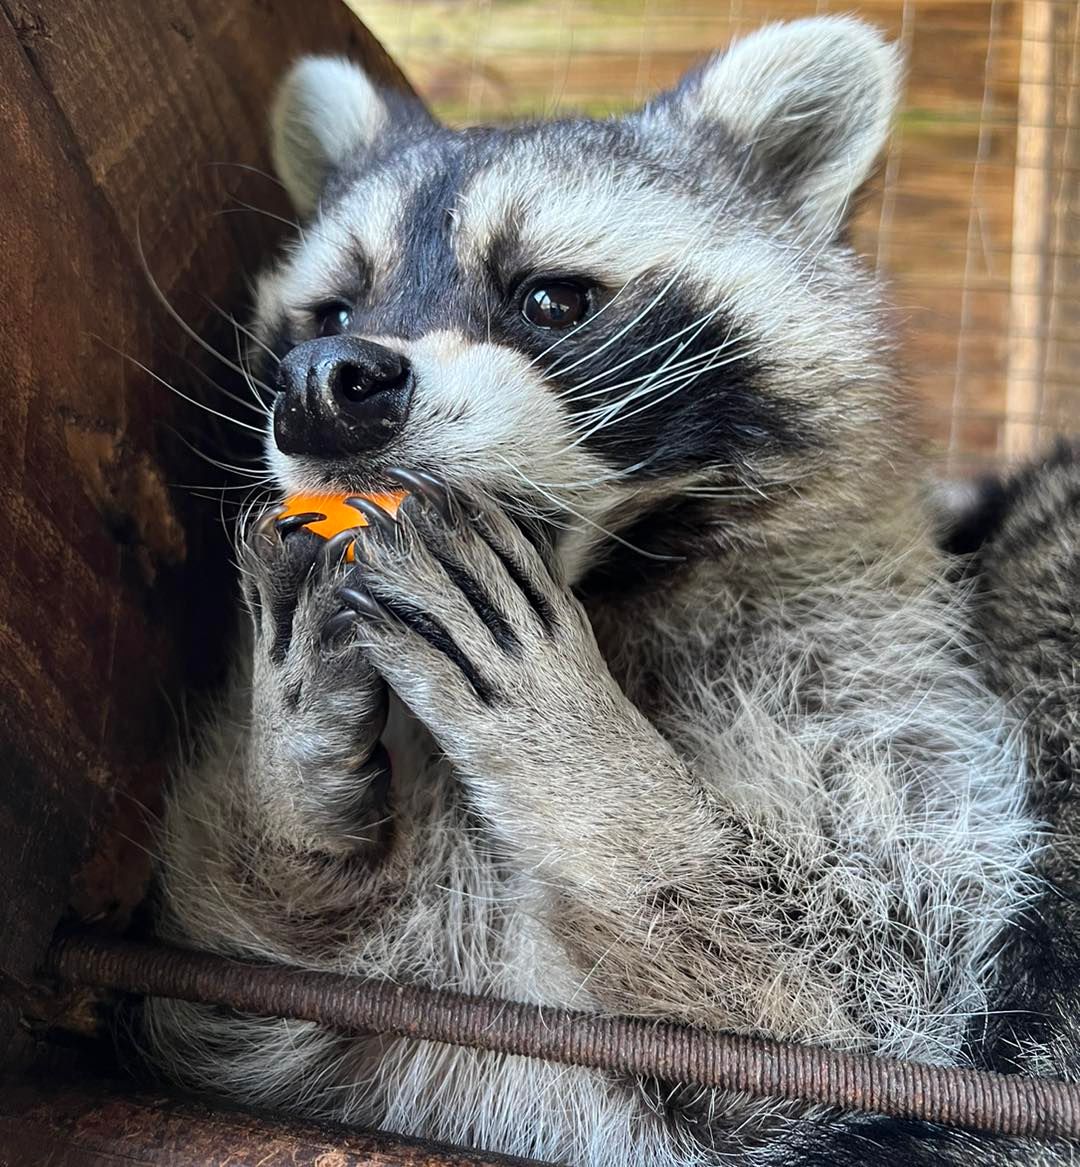 Fact of the week 📖 Raccoons (Procyon lotor), enter a state known as torpor in the cold winter months to conserve as much energy as possible while food is less available. As the days get longer, and eventually warmer, they will be more active again. #sanctuary #raccoons